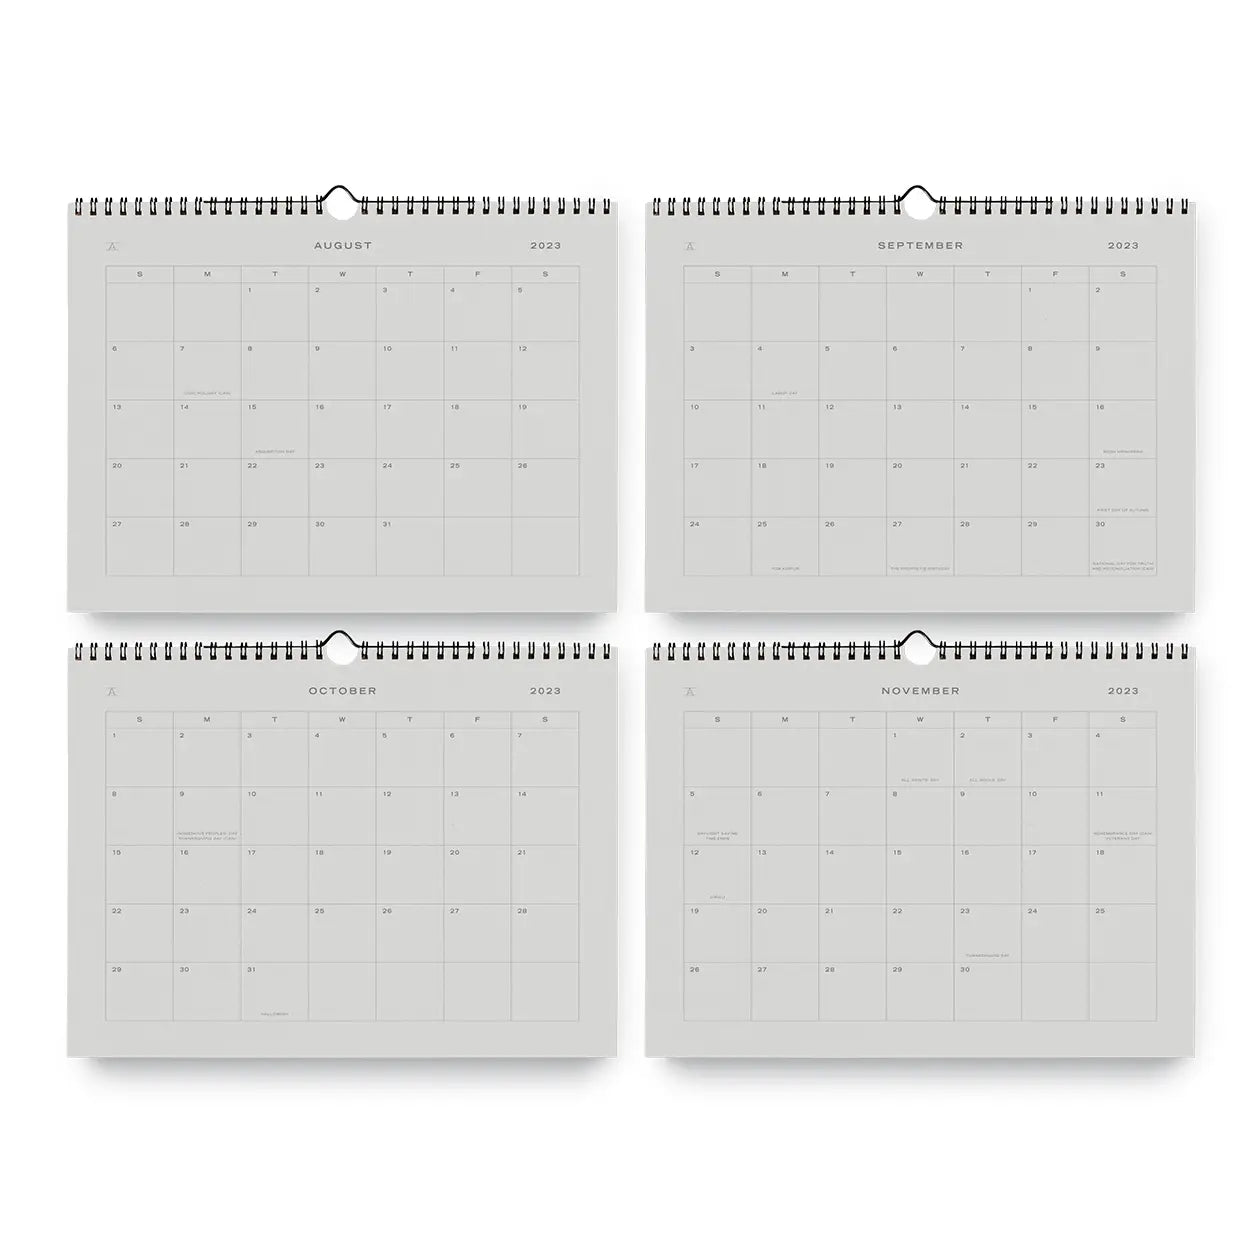 Appointed Studio Wall Calendar